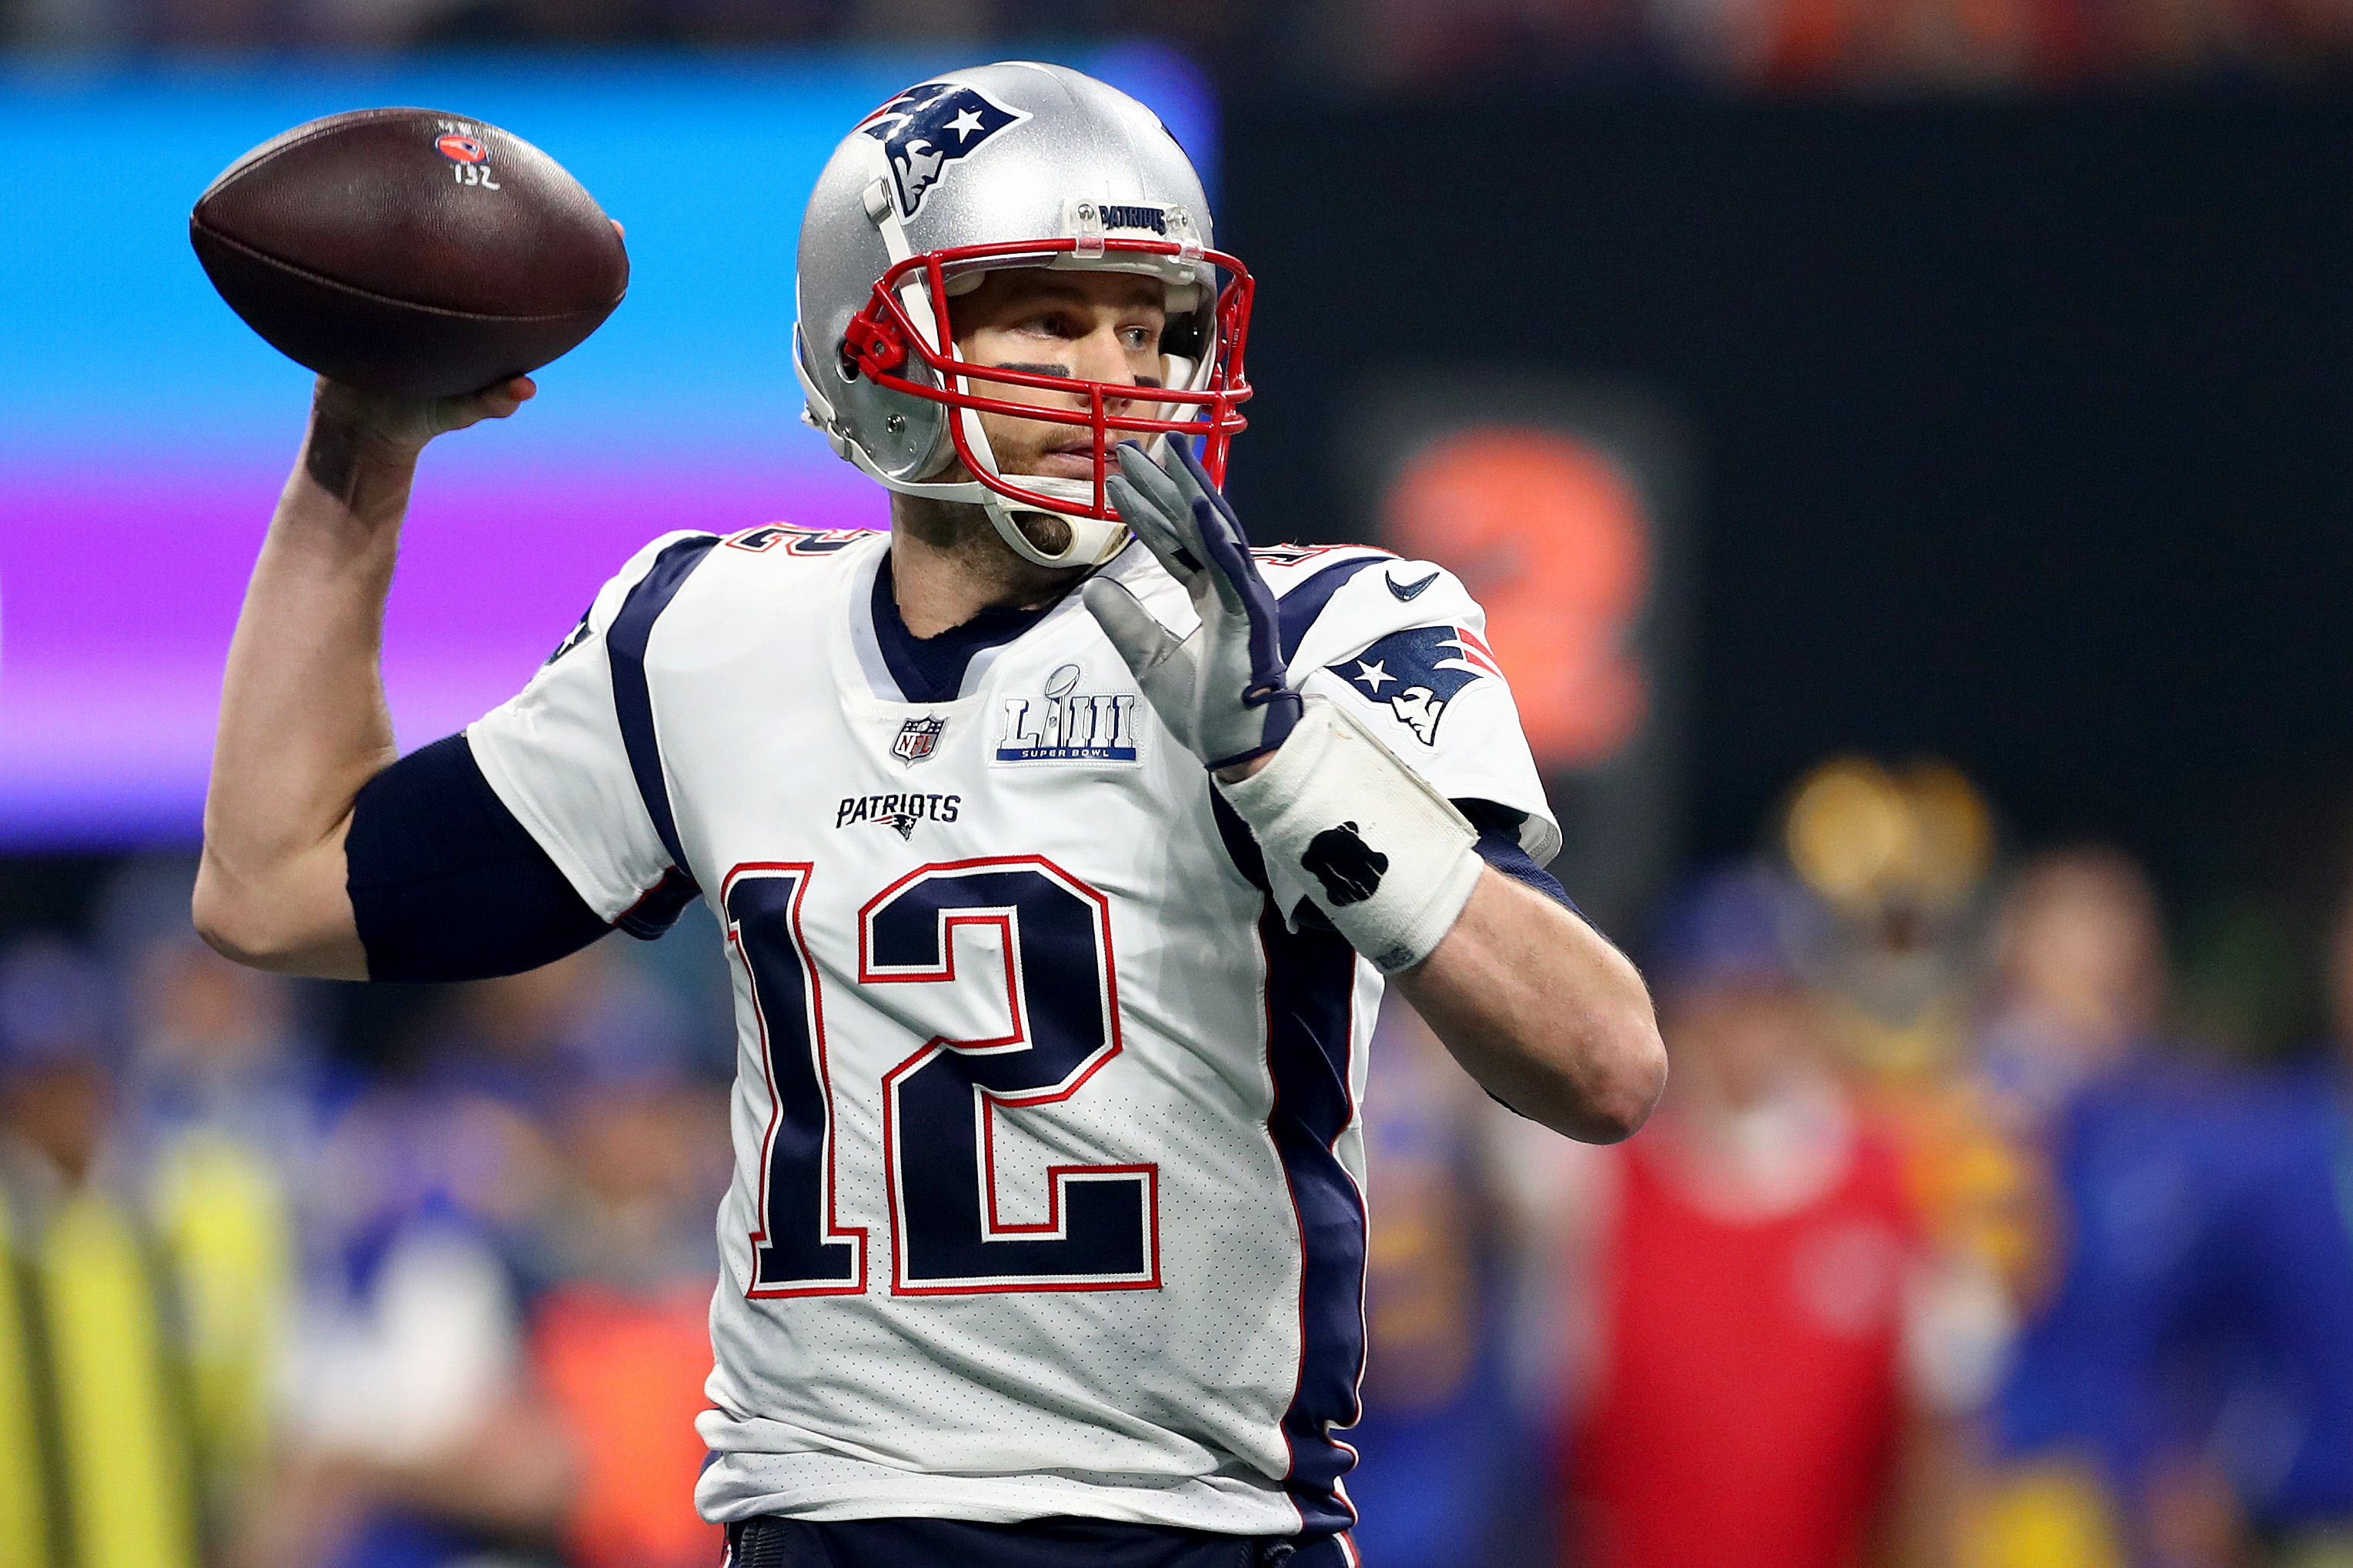 Tom Brady #12 of the New England Patriots attempts a pass against the Los Angeles Rams in the first quarter during Super Bowl LIII at Mercedes-Benz Stadium on February 03, 2019 in Atlanta, Georgia. (Maddie Meyer&mdash;Getty Images)